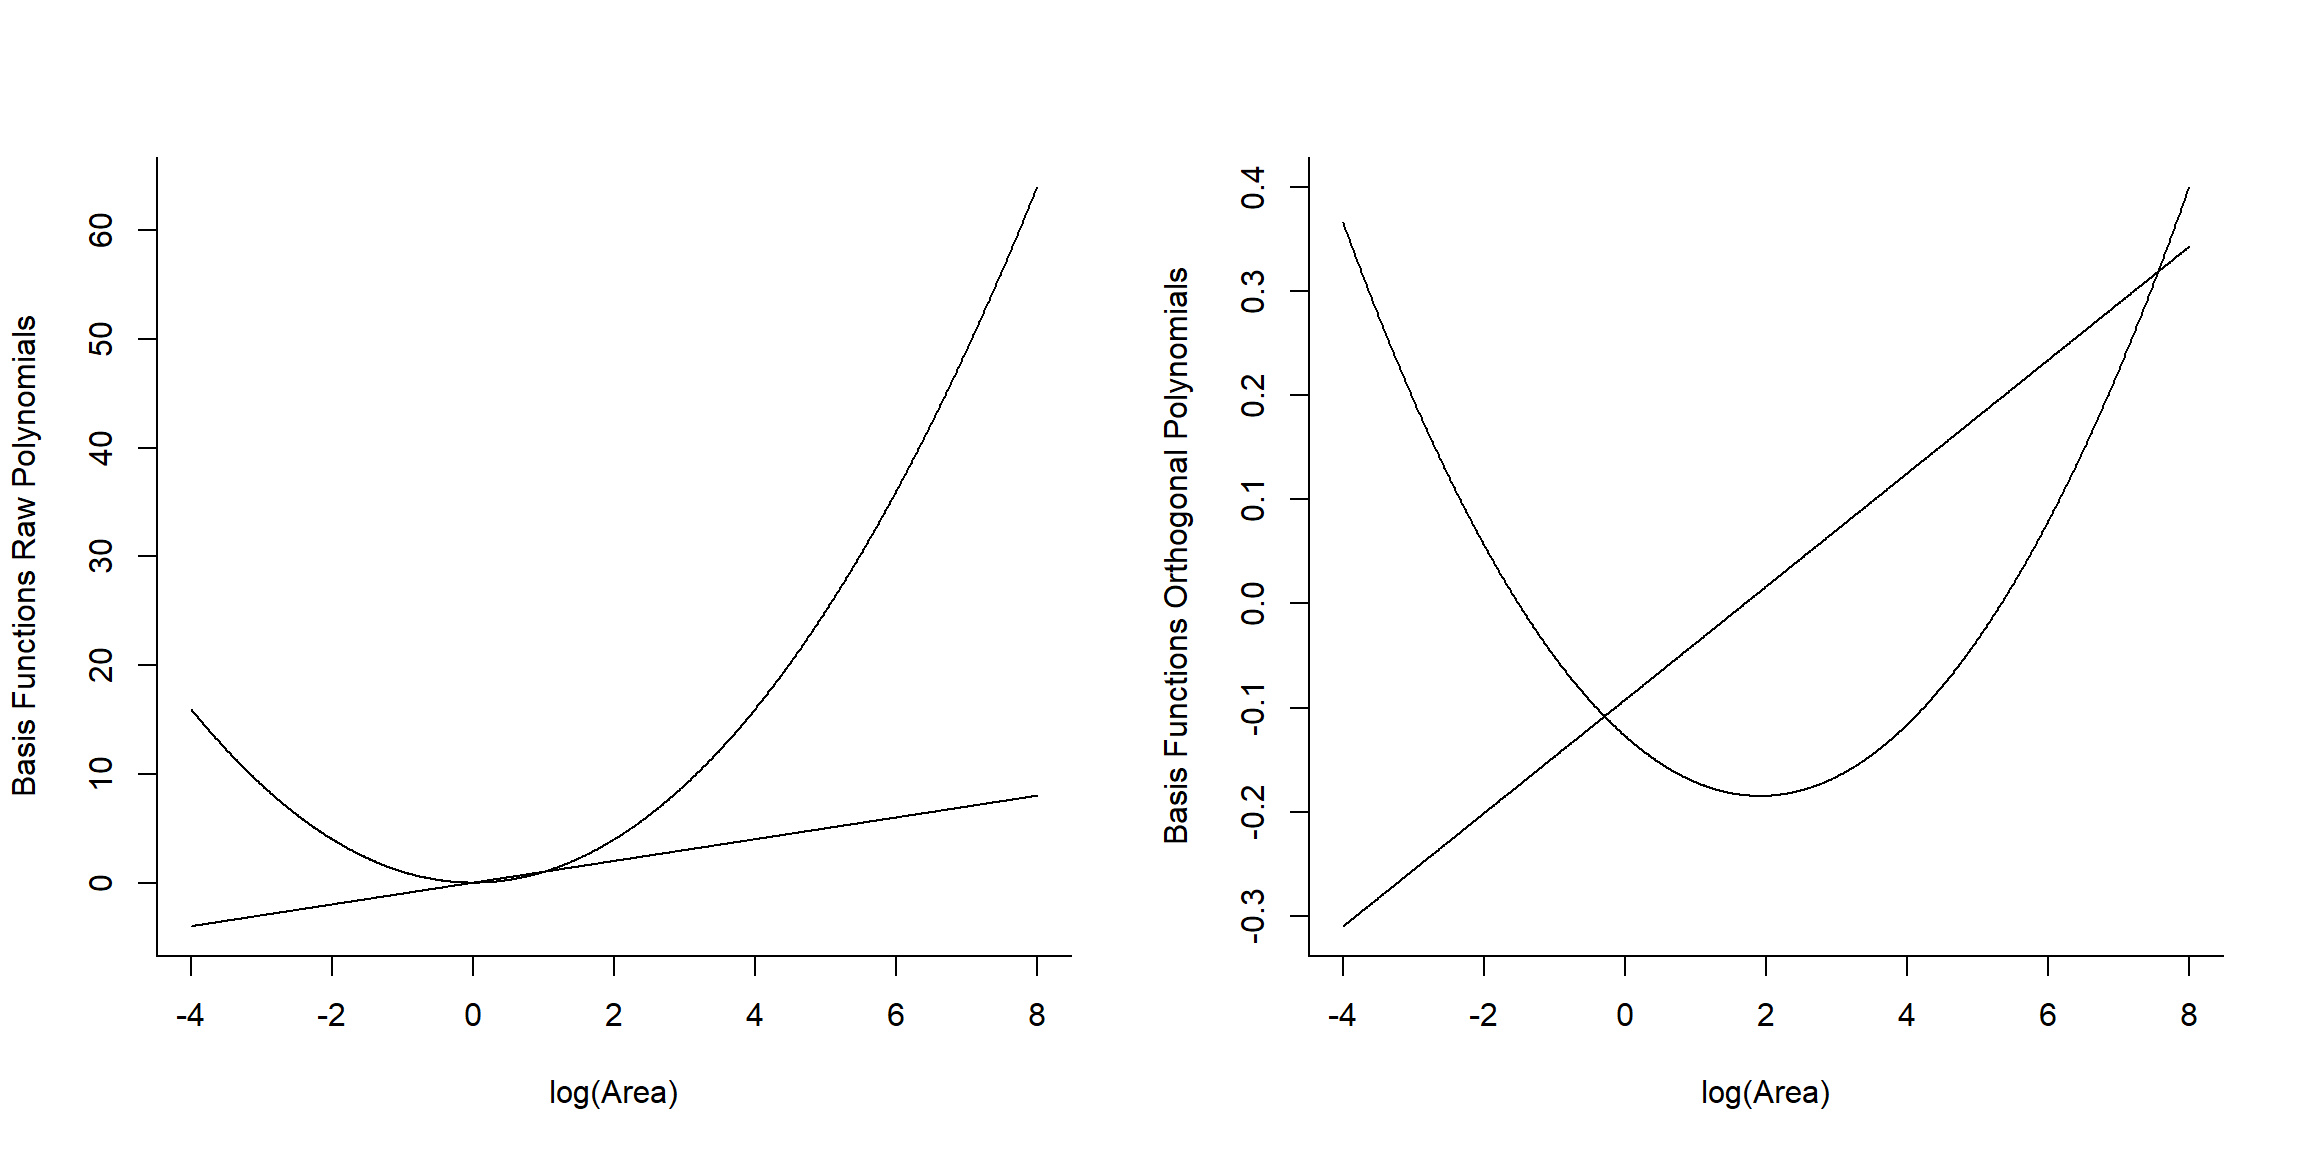 Basic vectors used to fit raw and orthogonal polynomial models.